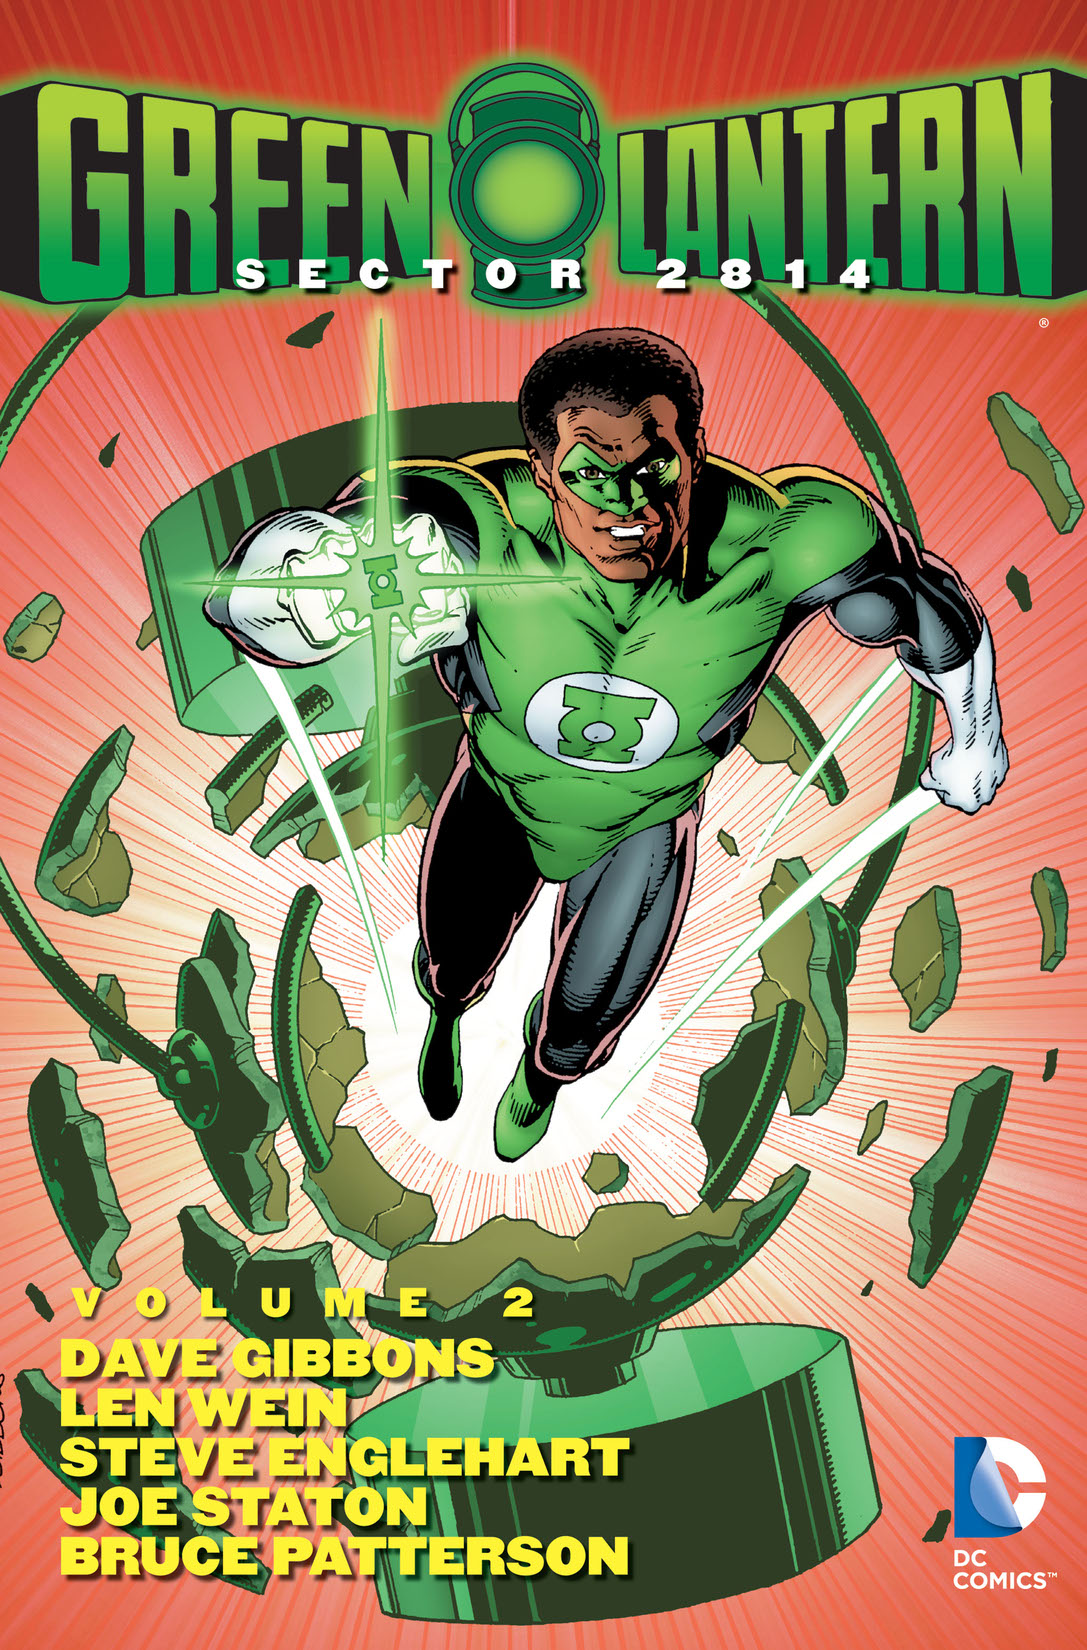 Green Lantern: Sector 2814 Vol. 2 preview images